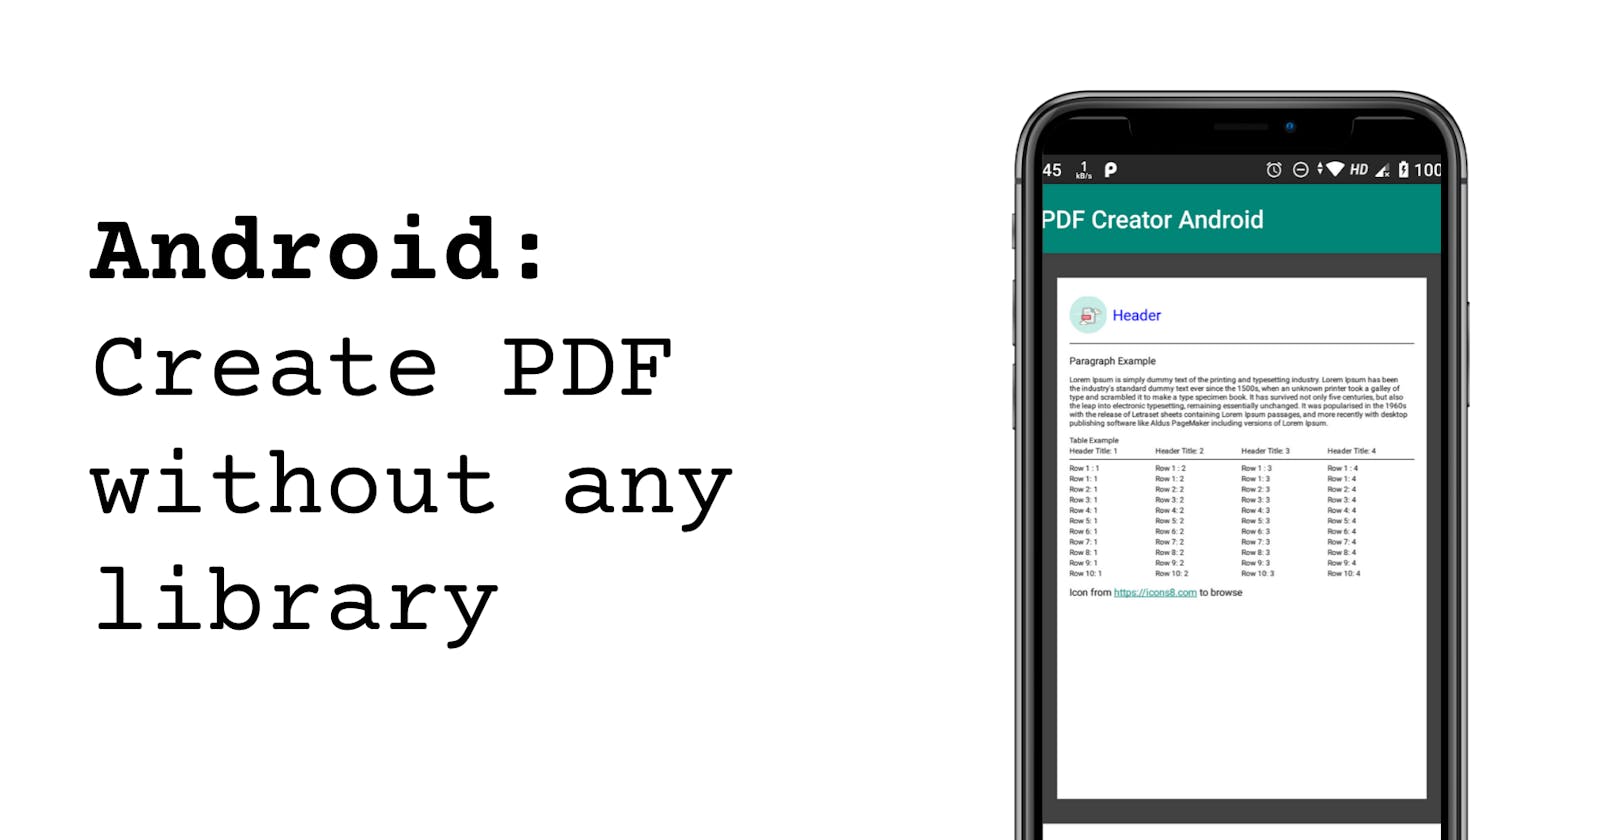 Android: Create PDF without any library [Part 1]